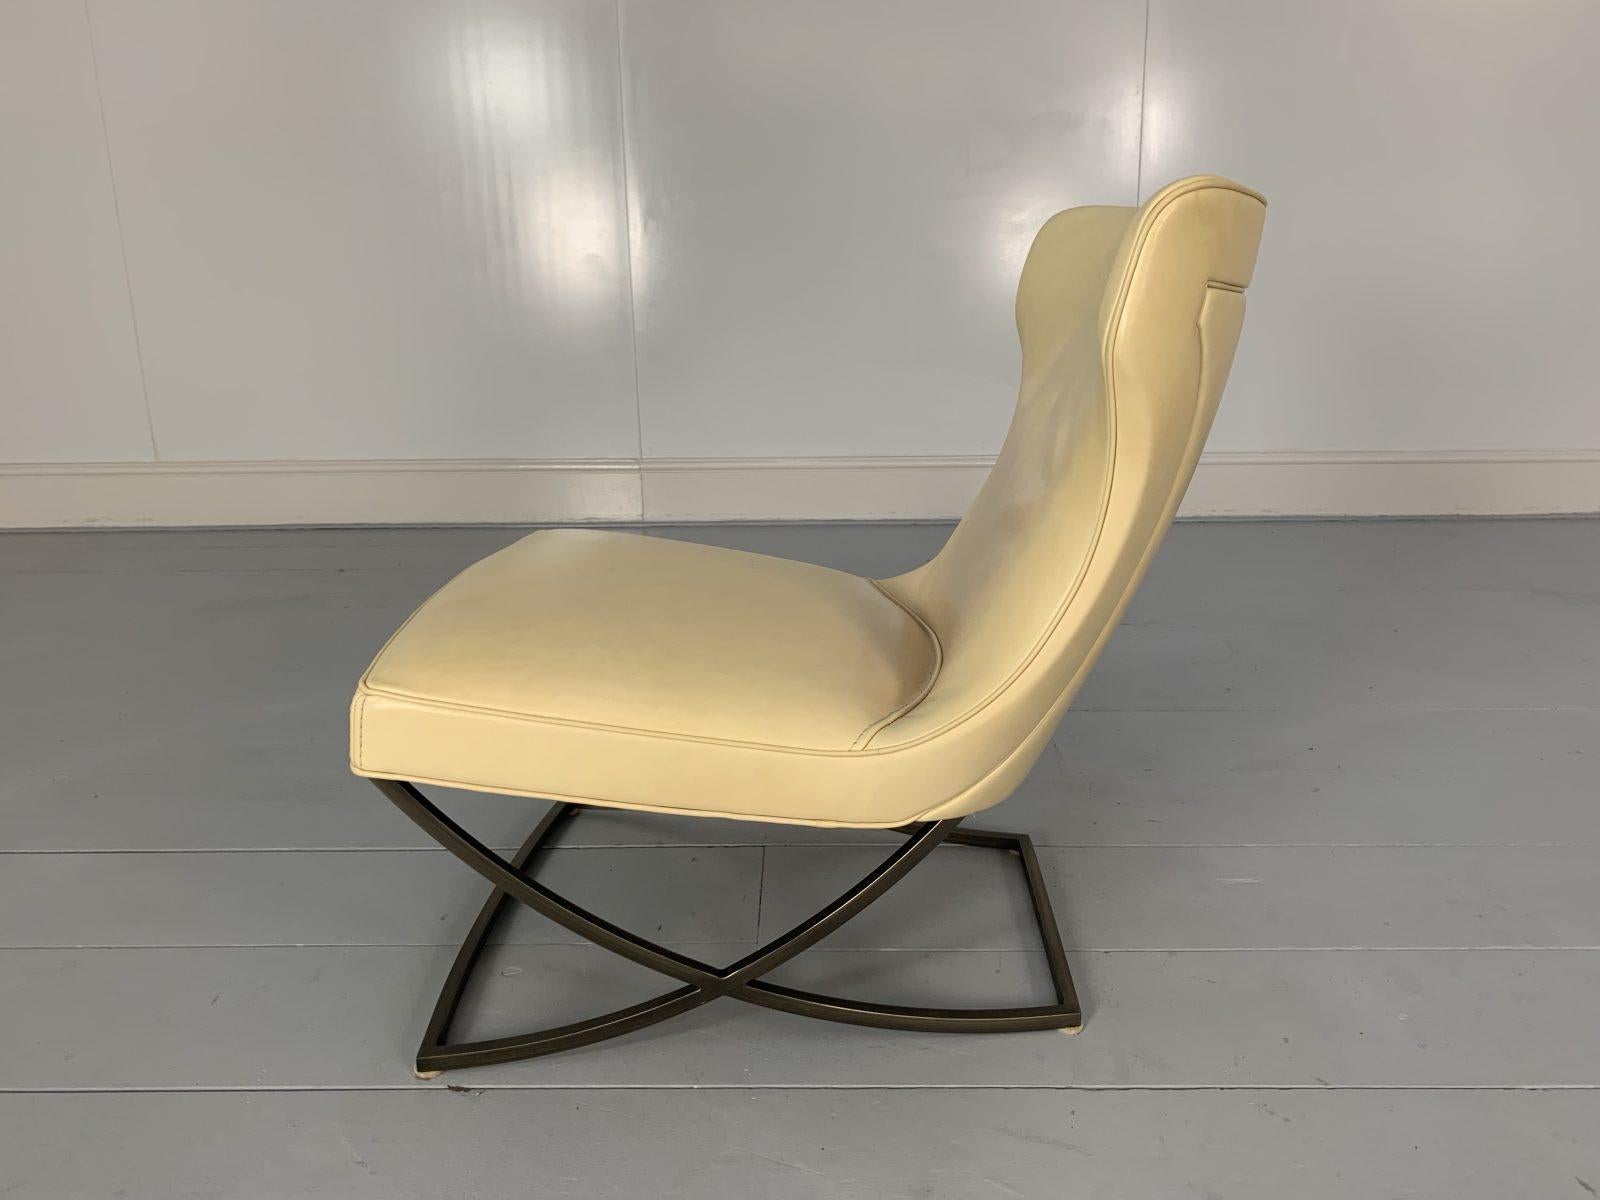 Pair of Baxter “Paloma” Chairs, in Cream Leather For Sale 5